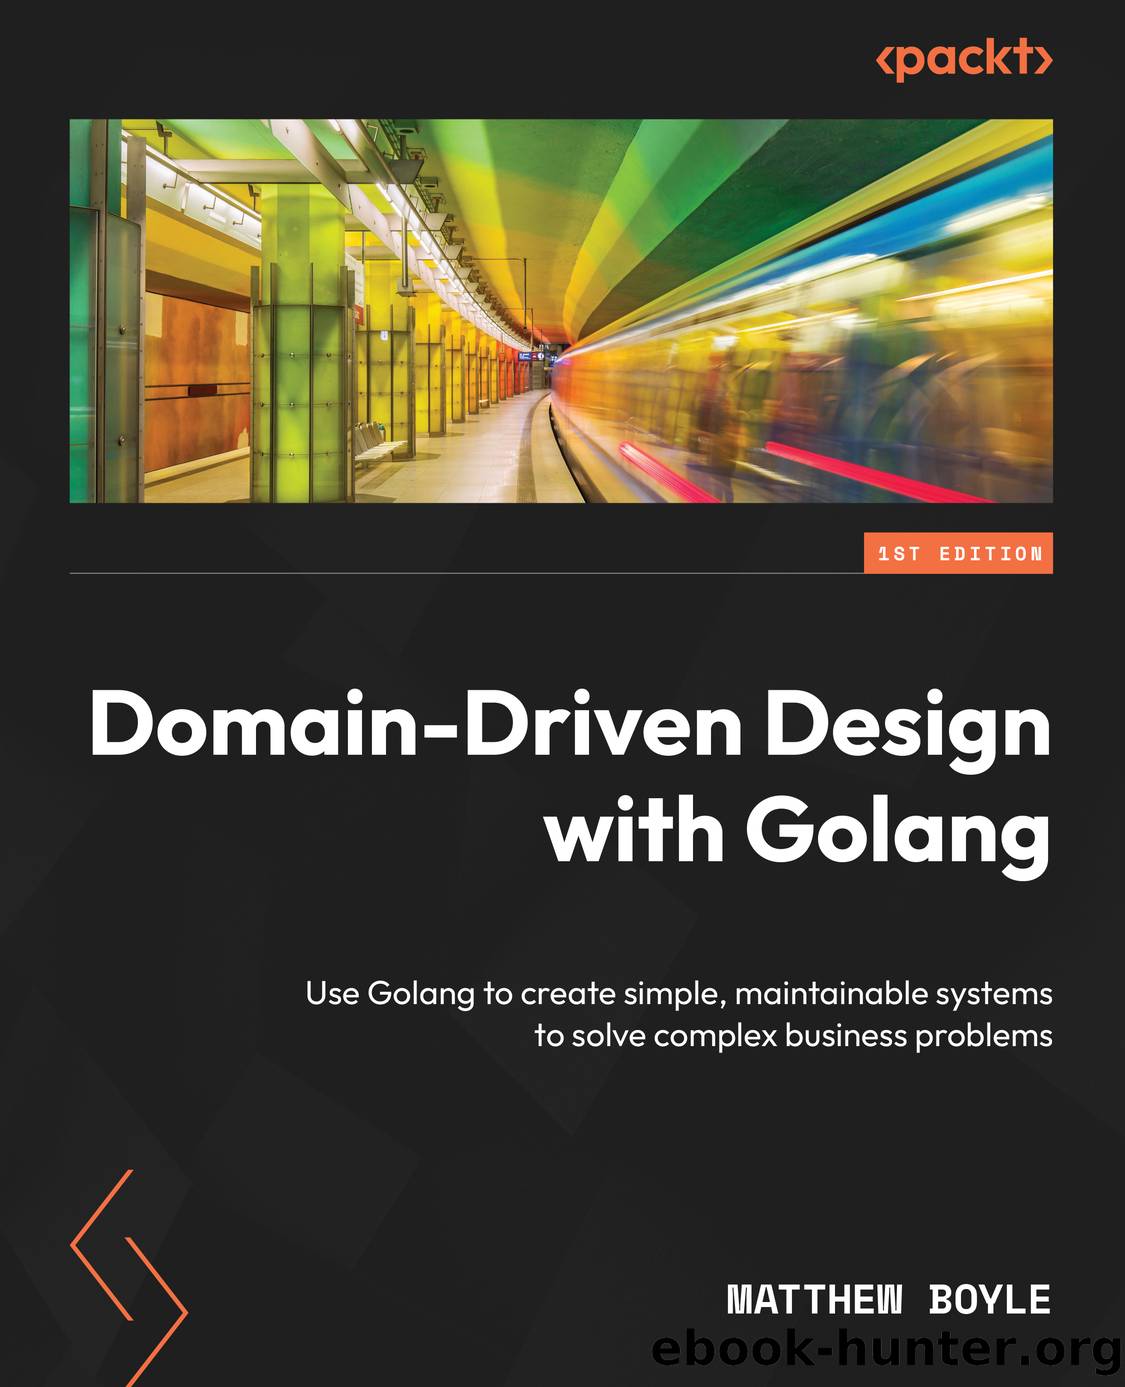 Domain-Driven Design with Golang by Matthew Boyle